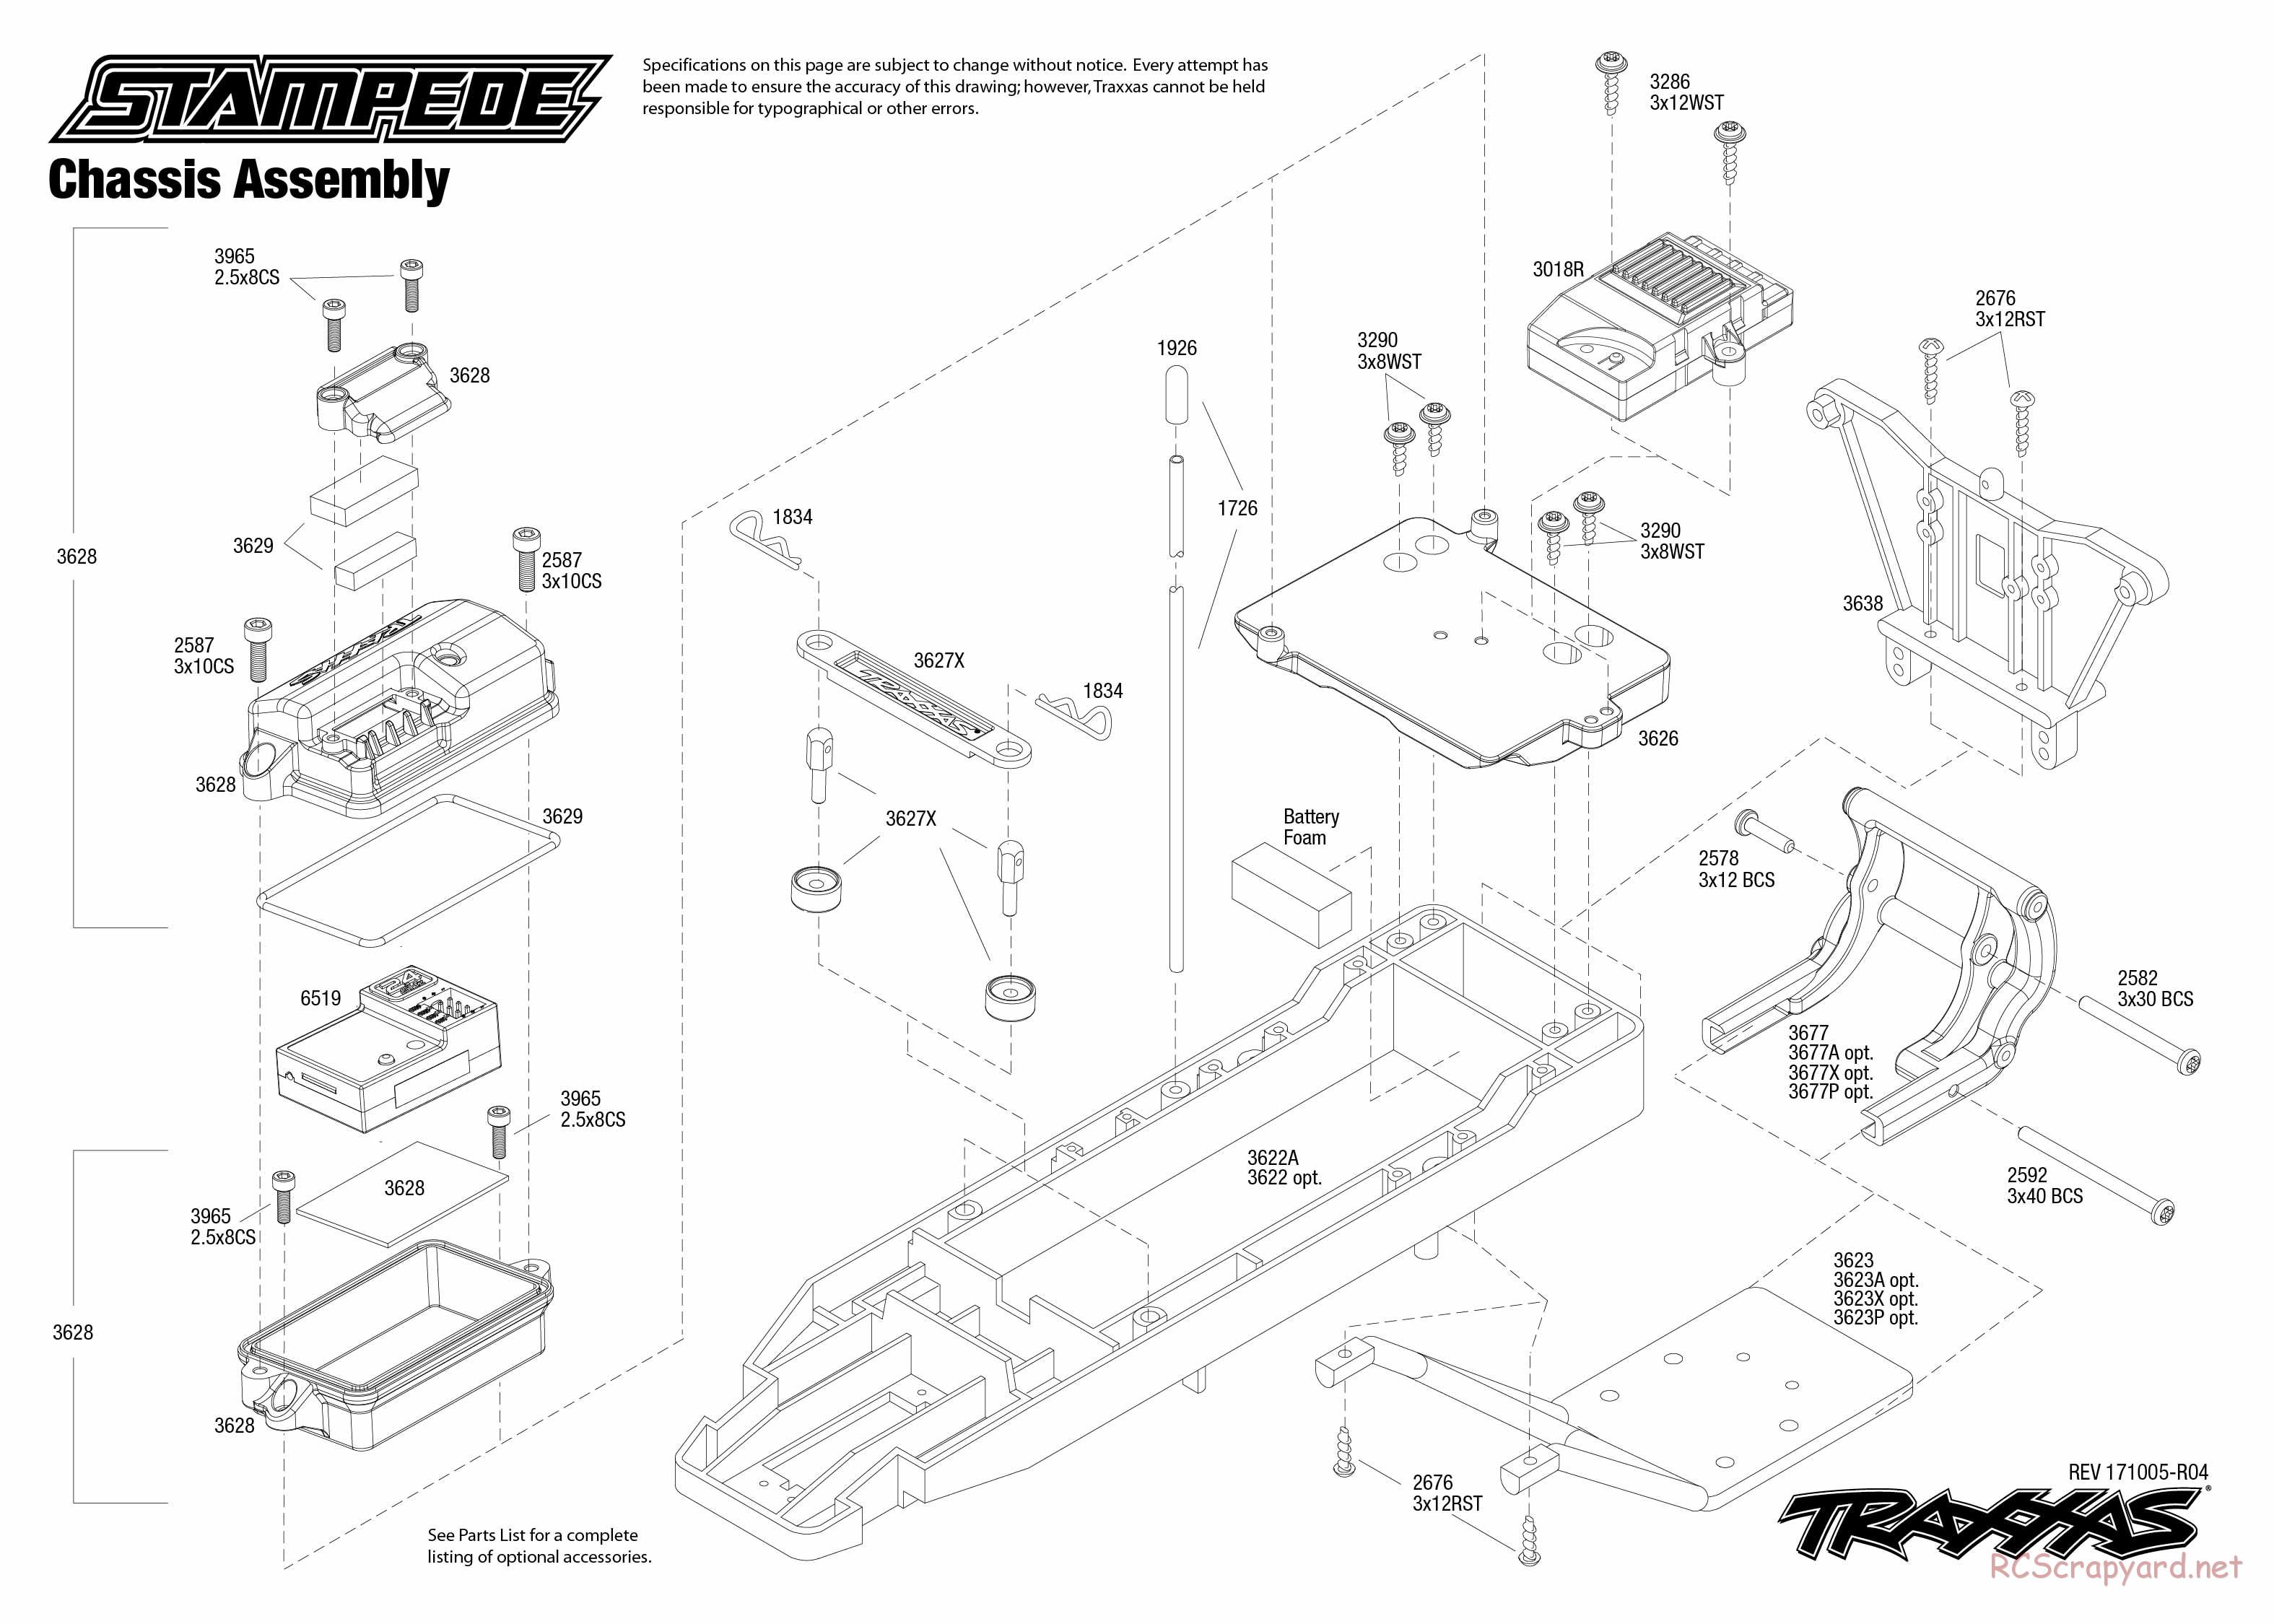 Traxxas - Stampede XL-5 (2018) - Exploded Views - Page 1